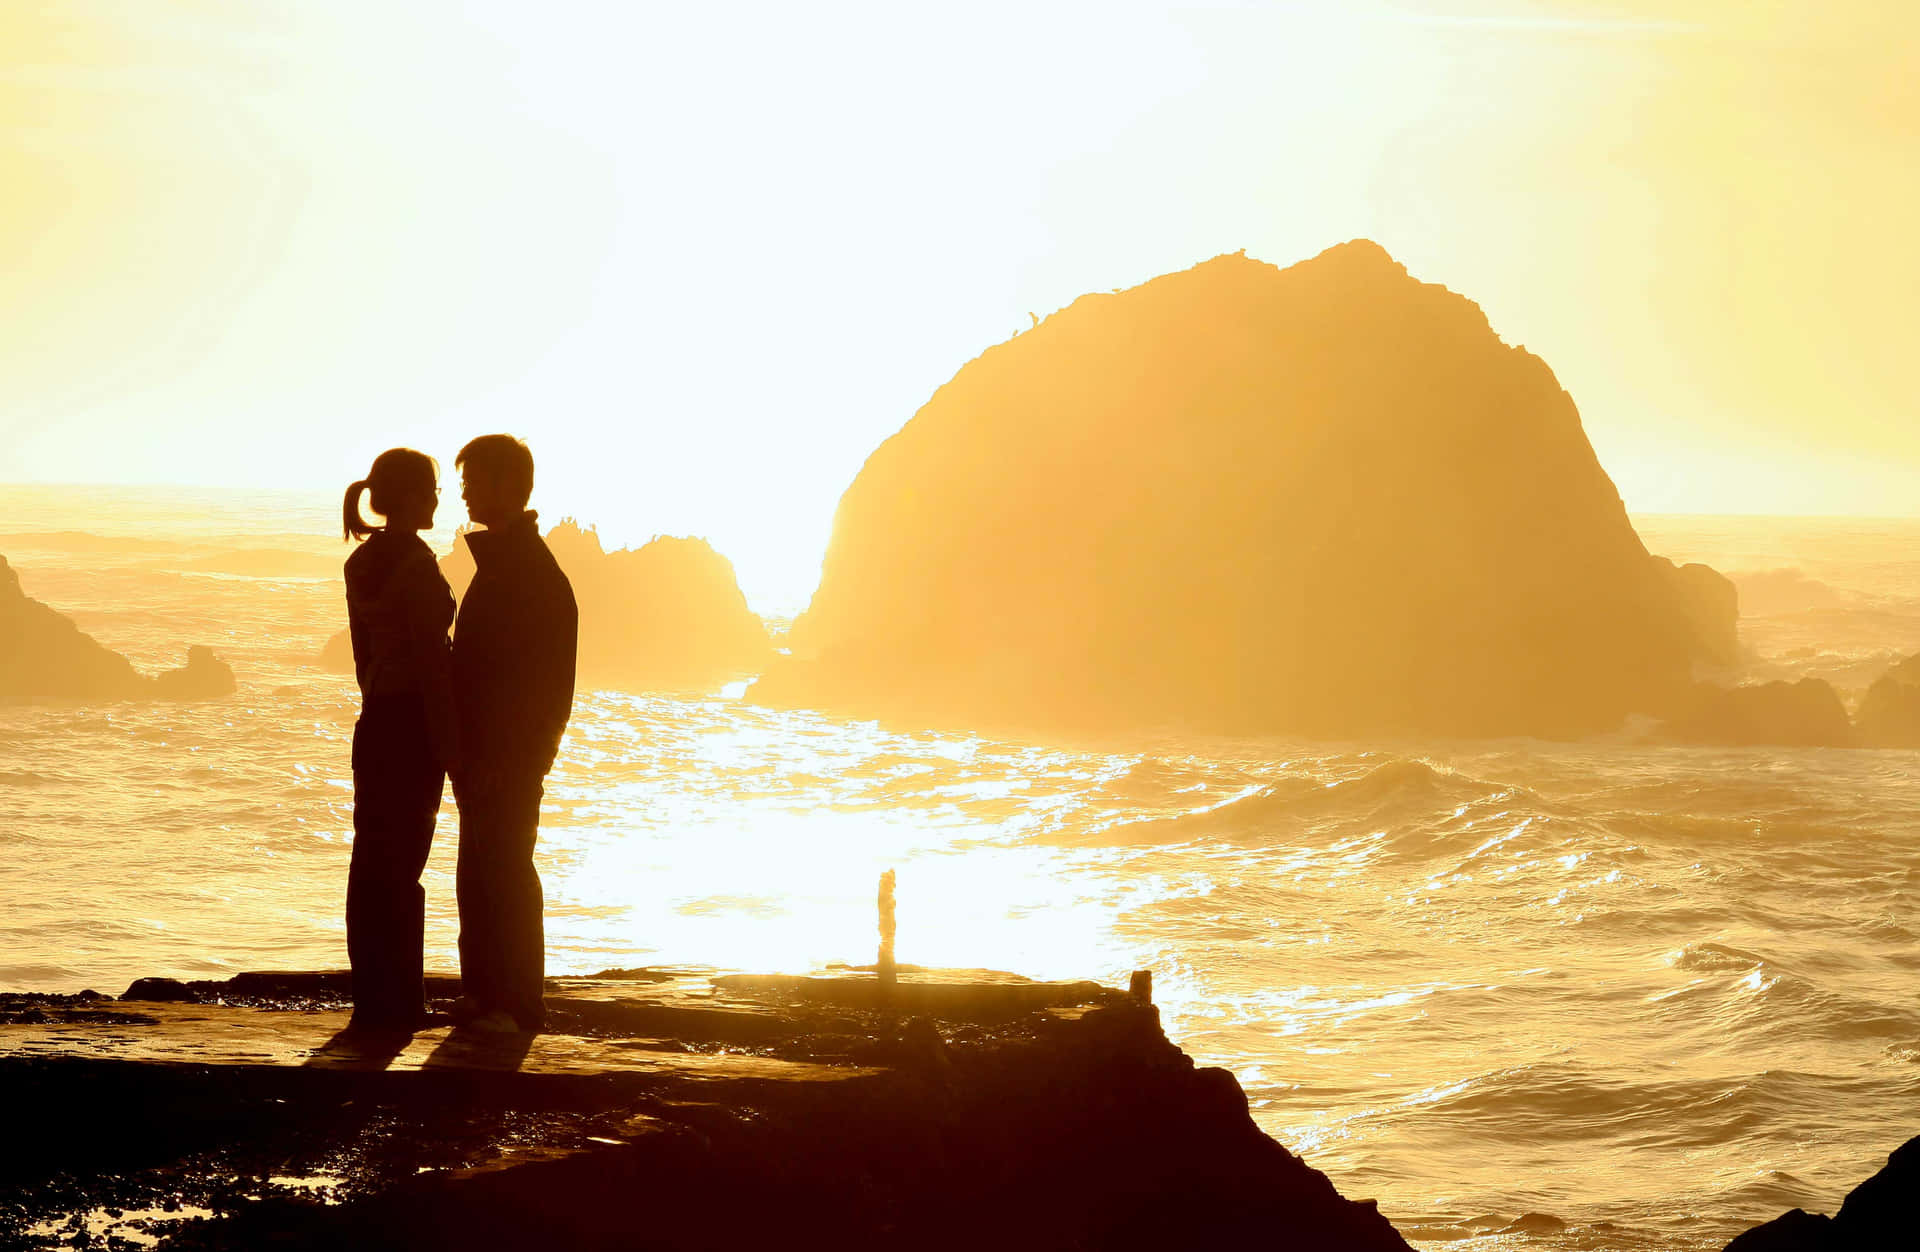 Sunset Couple Picture Romantic Aesthetic Peaceful Sea Waves